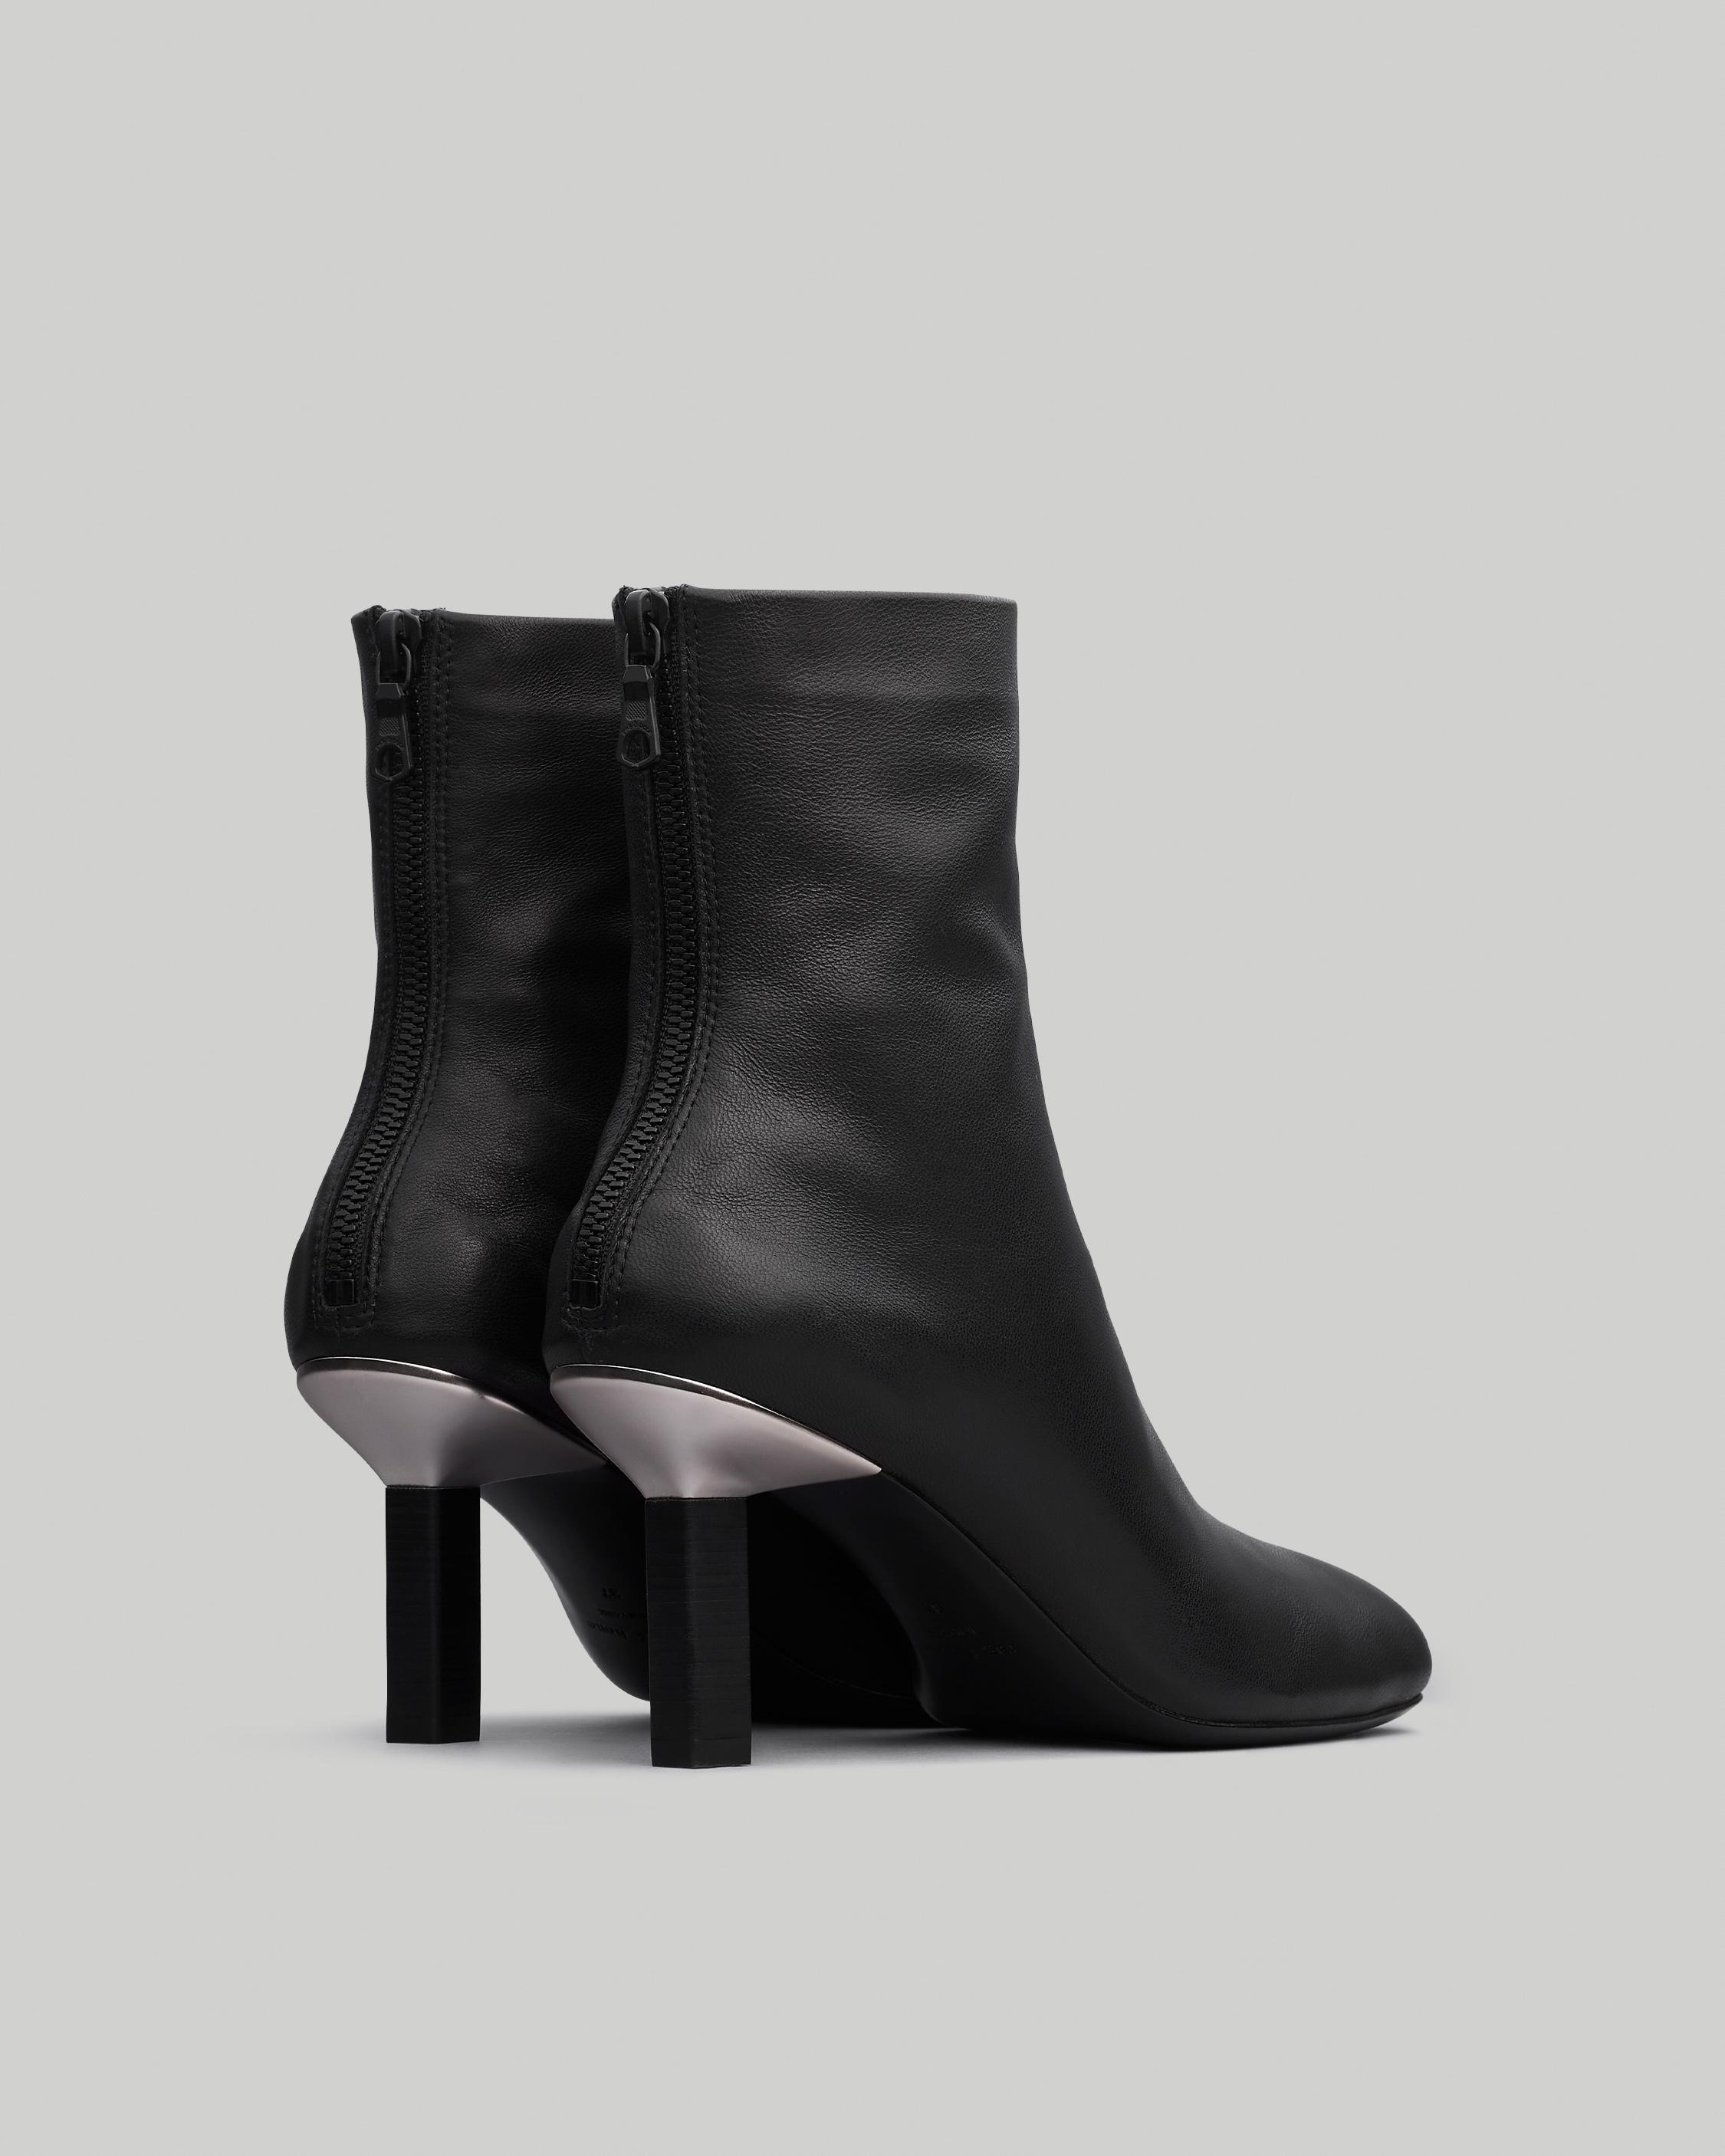 Joey Boot - Leather
Heeled Ankle Boot - 3